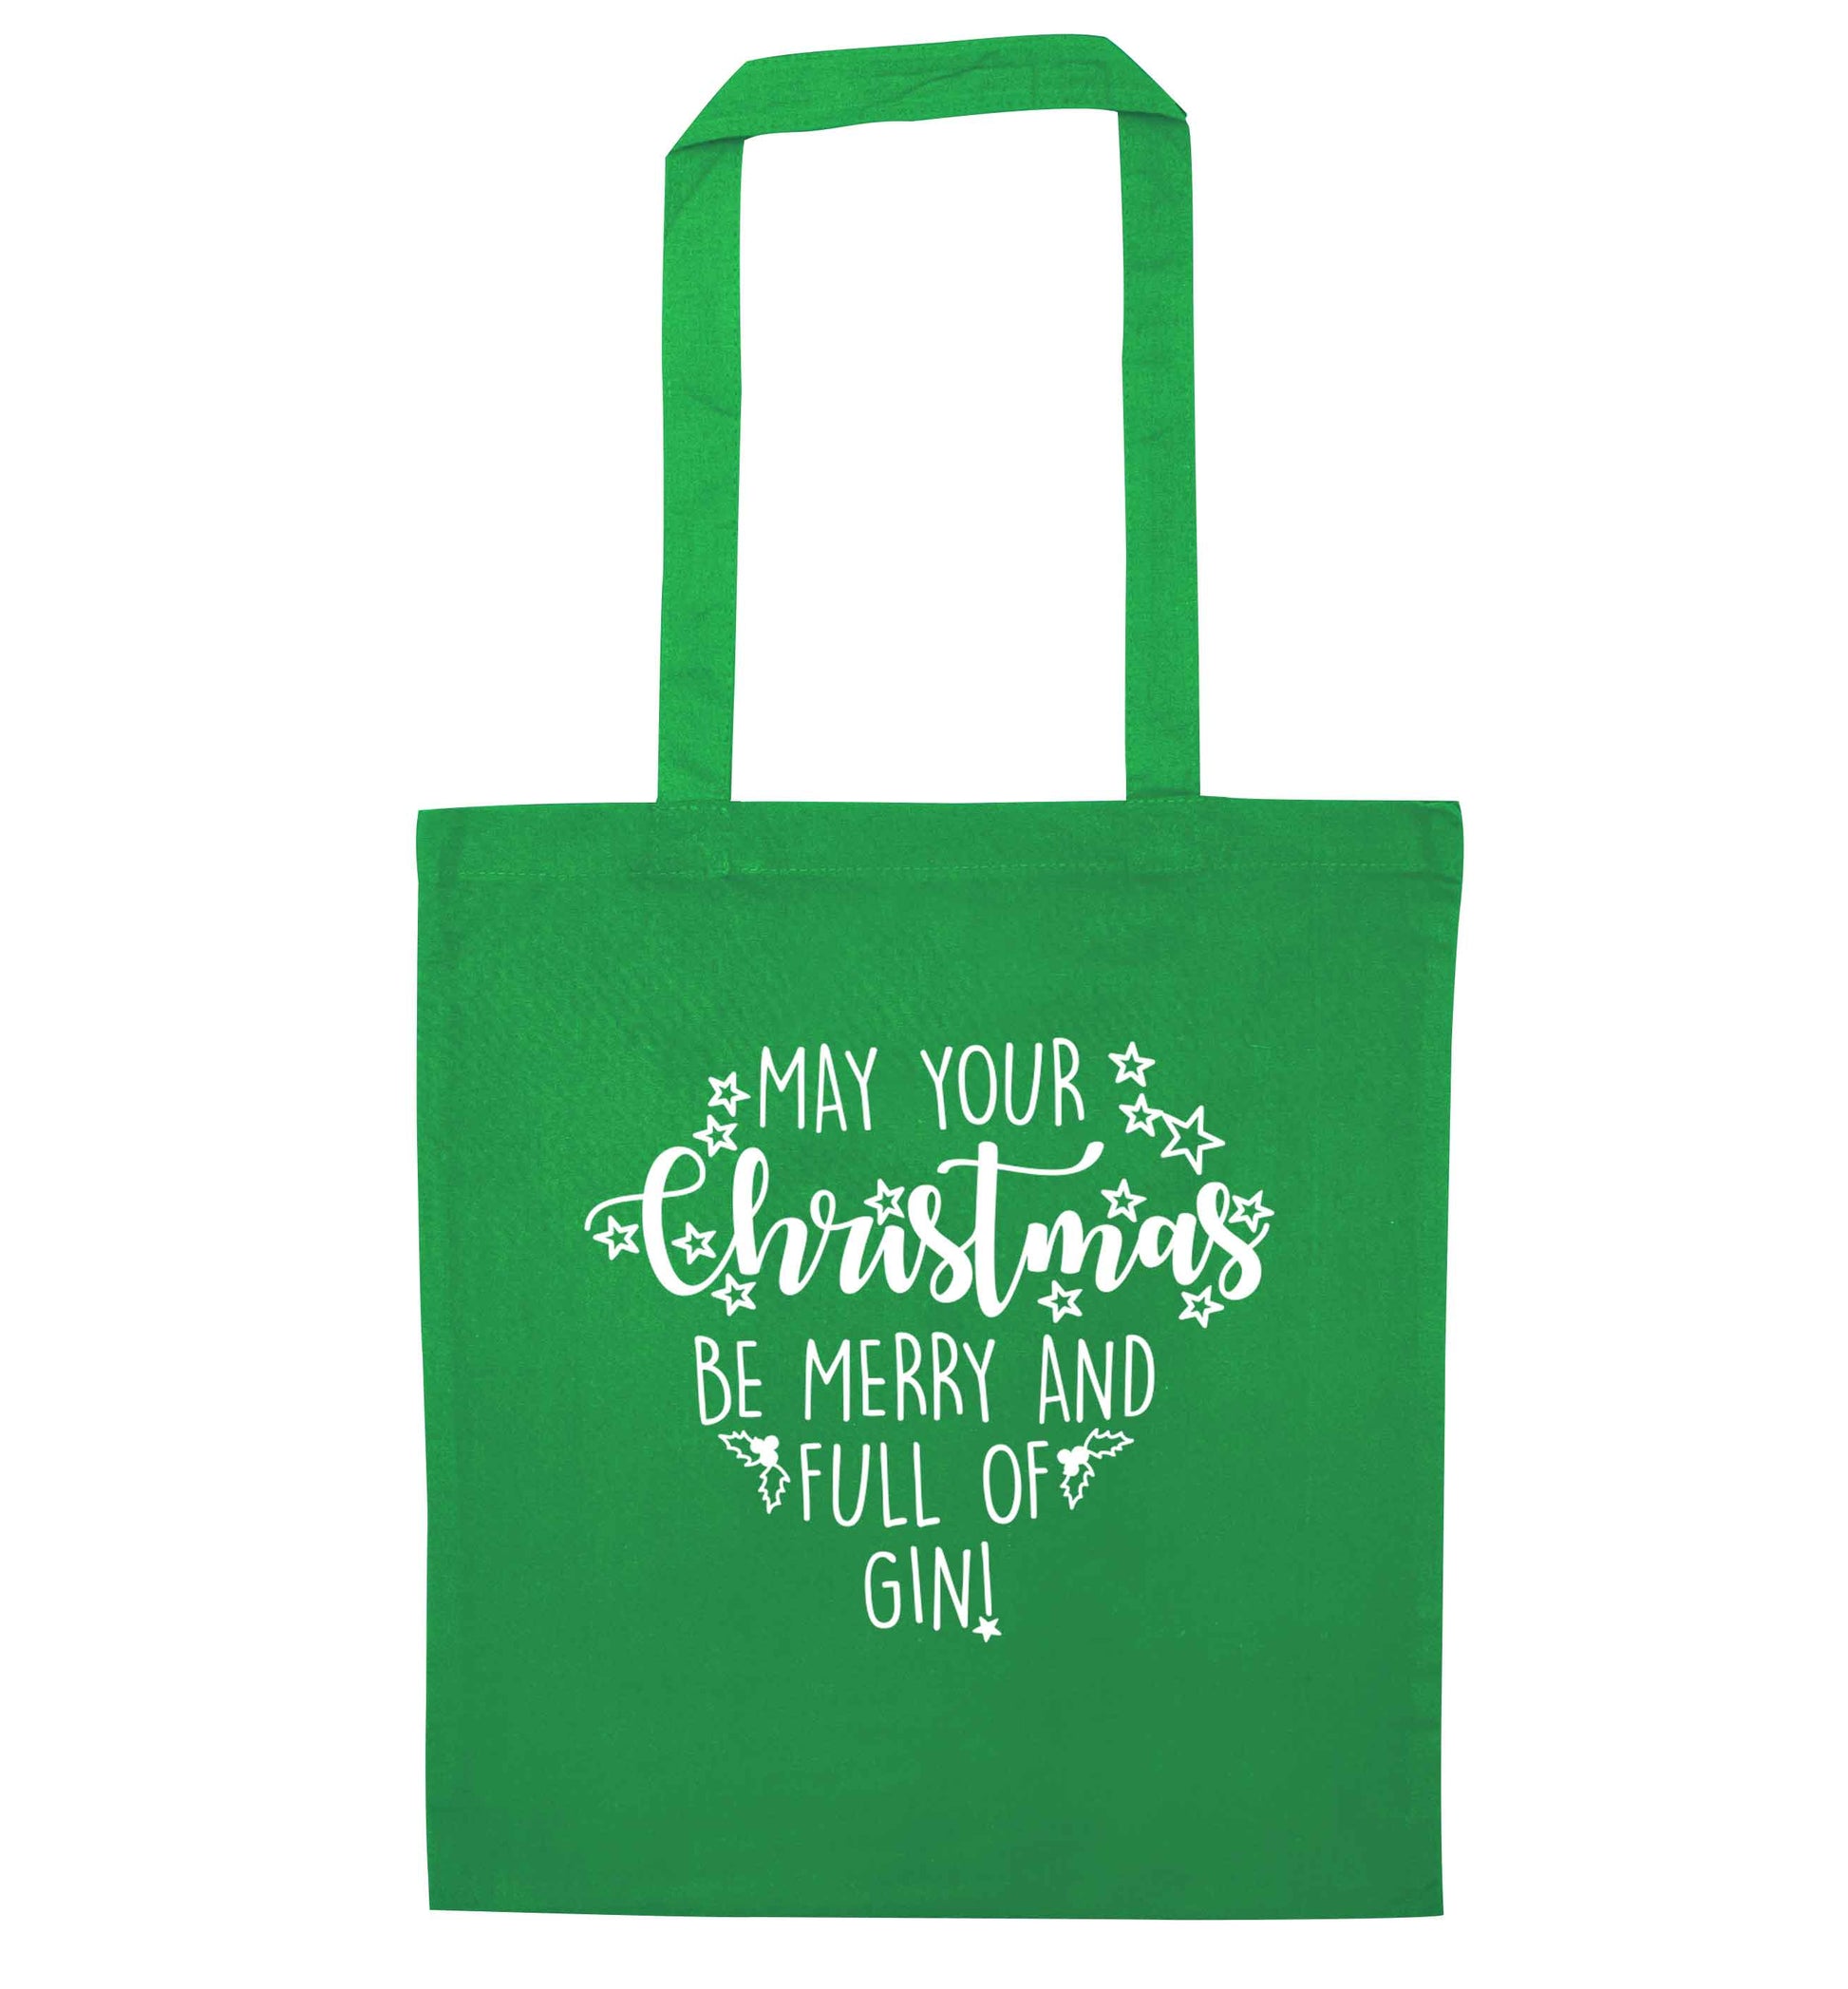 May your Christmas be merry and full of gin green tote bag